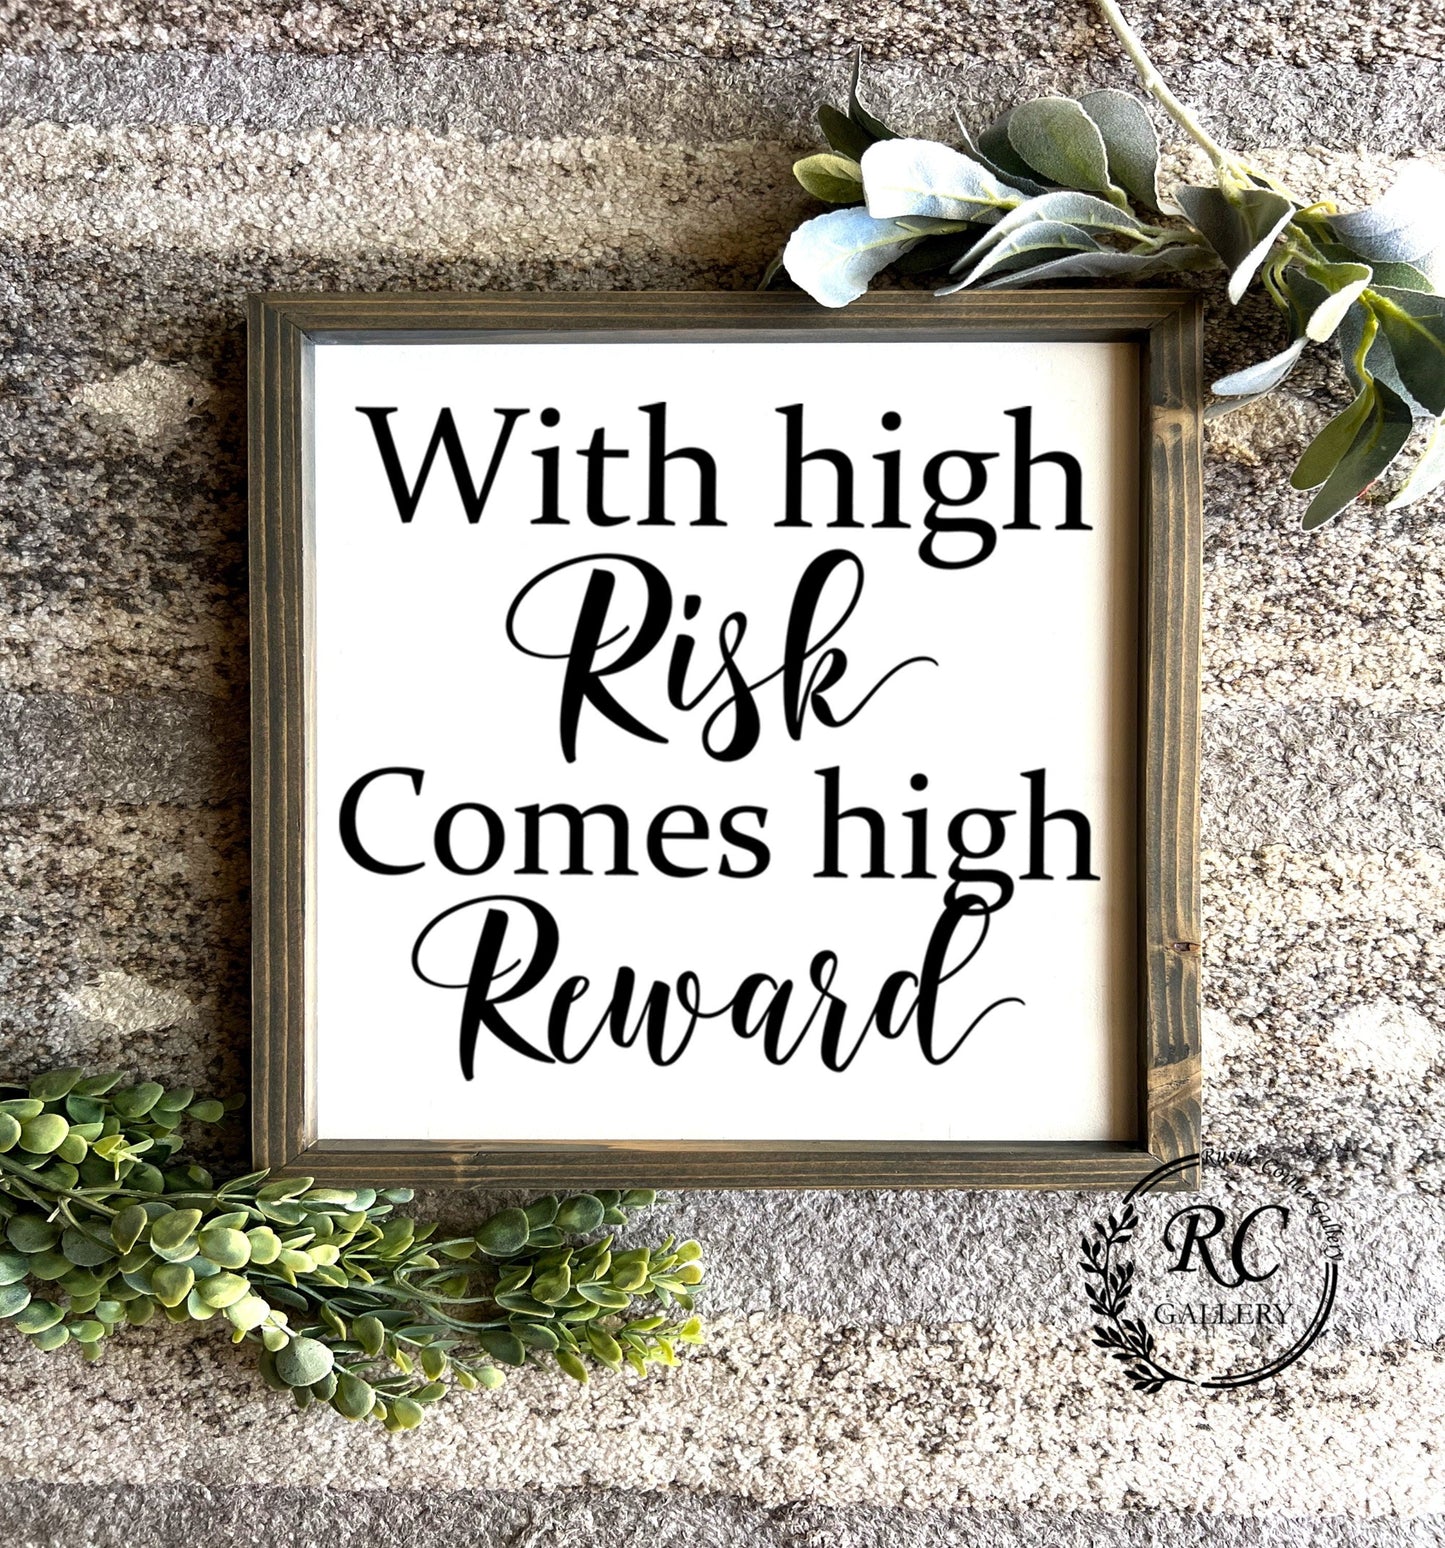 With high Risk comes high Reward motivational wood sign.